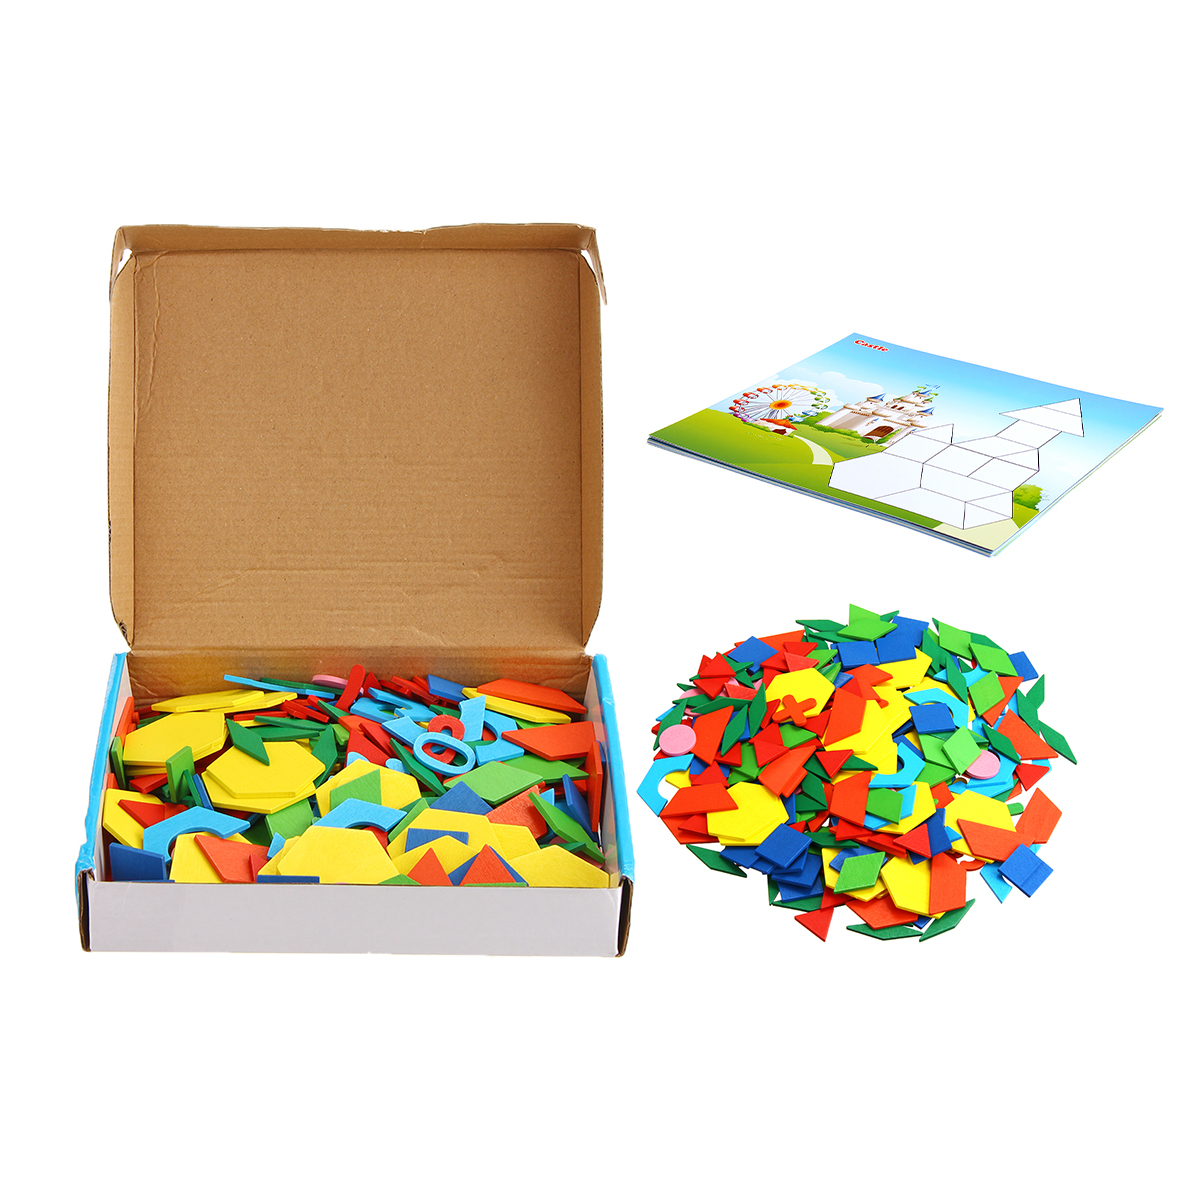 

250 Pcs Children Wooden Jigsaw Puzzle Building Blocks Early Education Learning Kid Toy